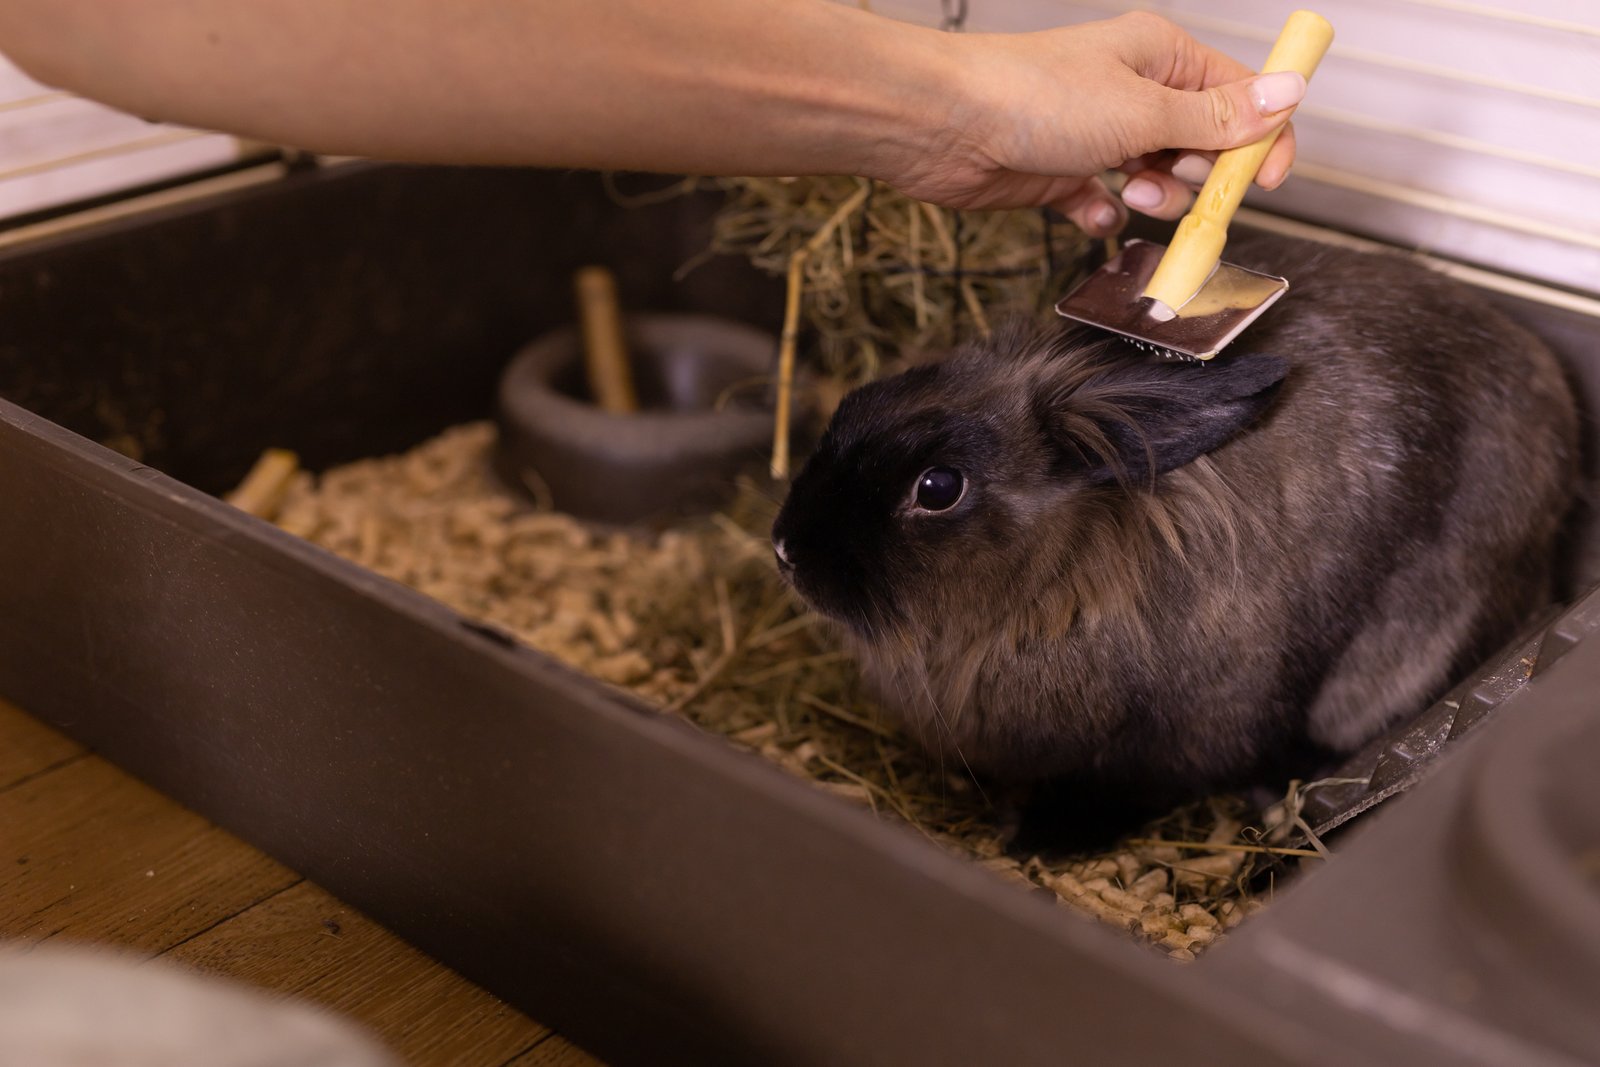 An owner removing rabbit's loose fur